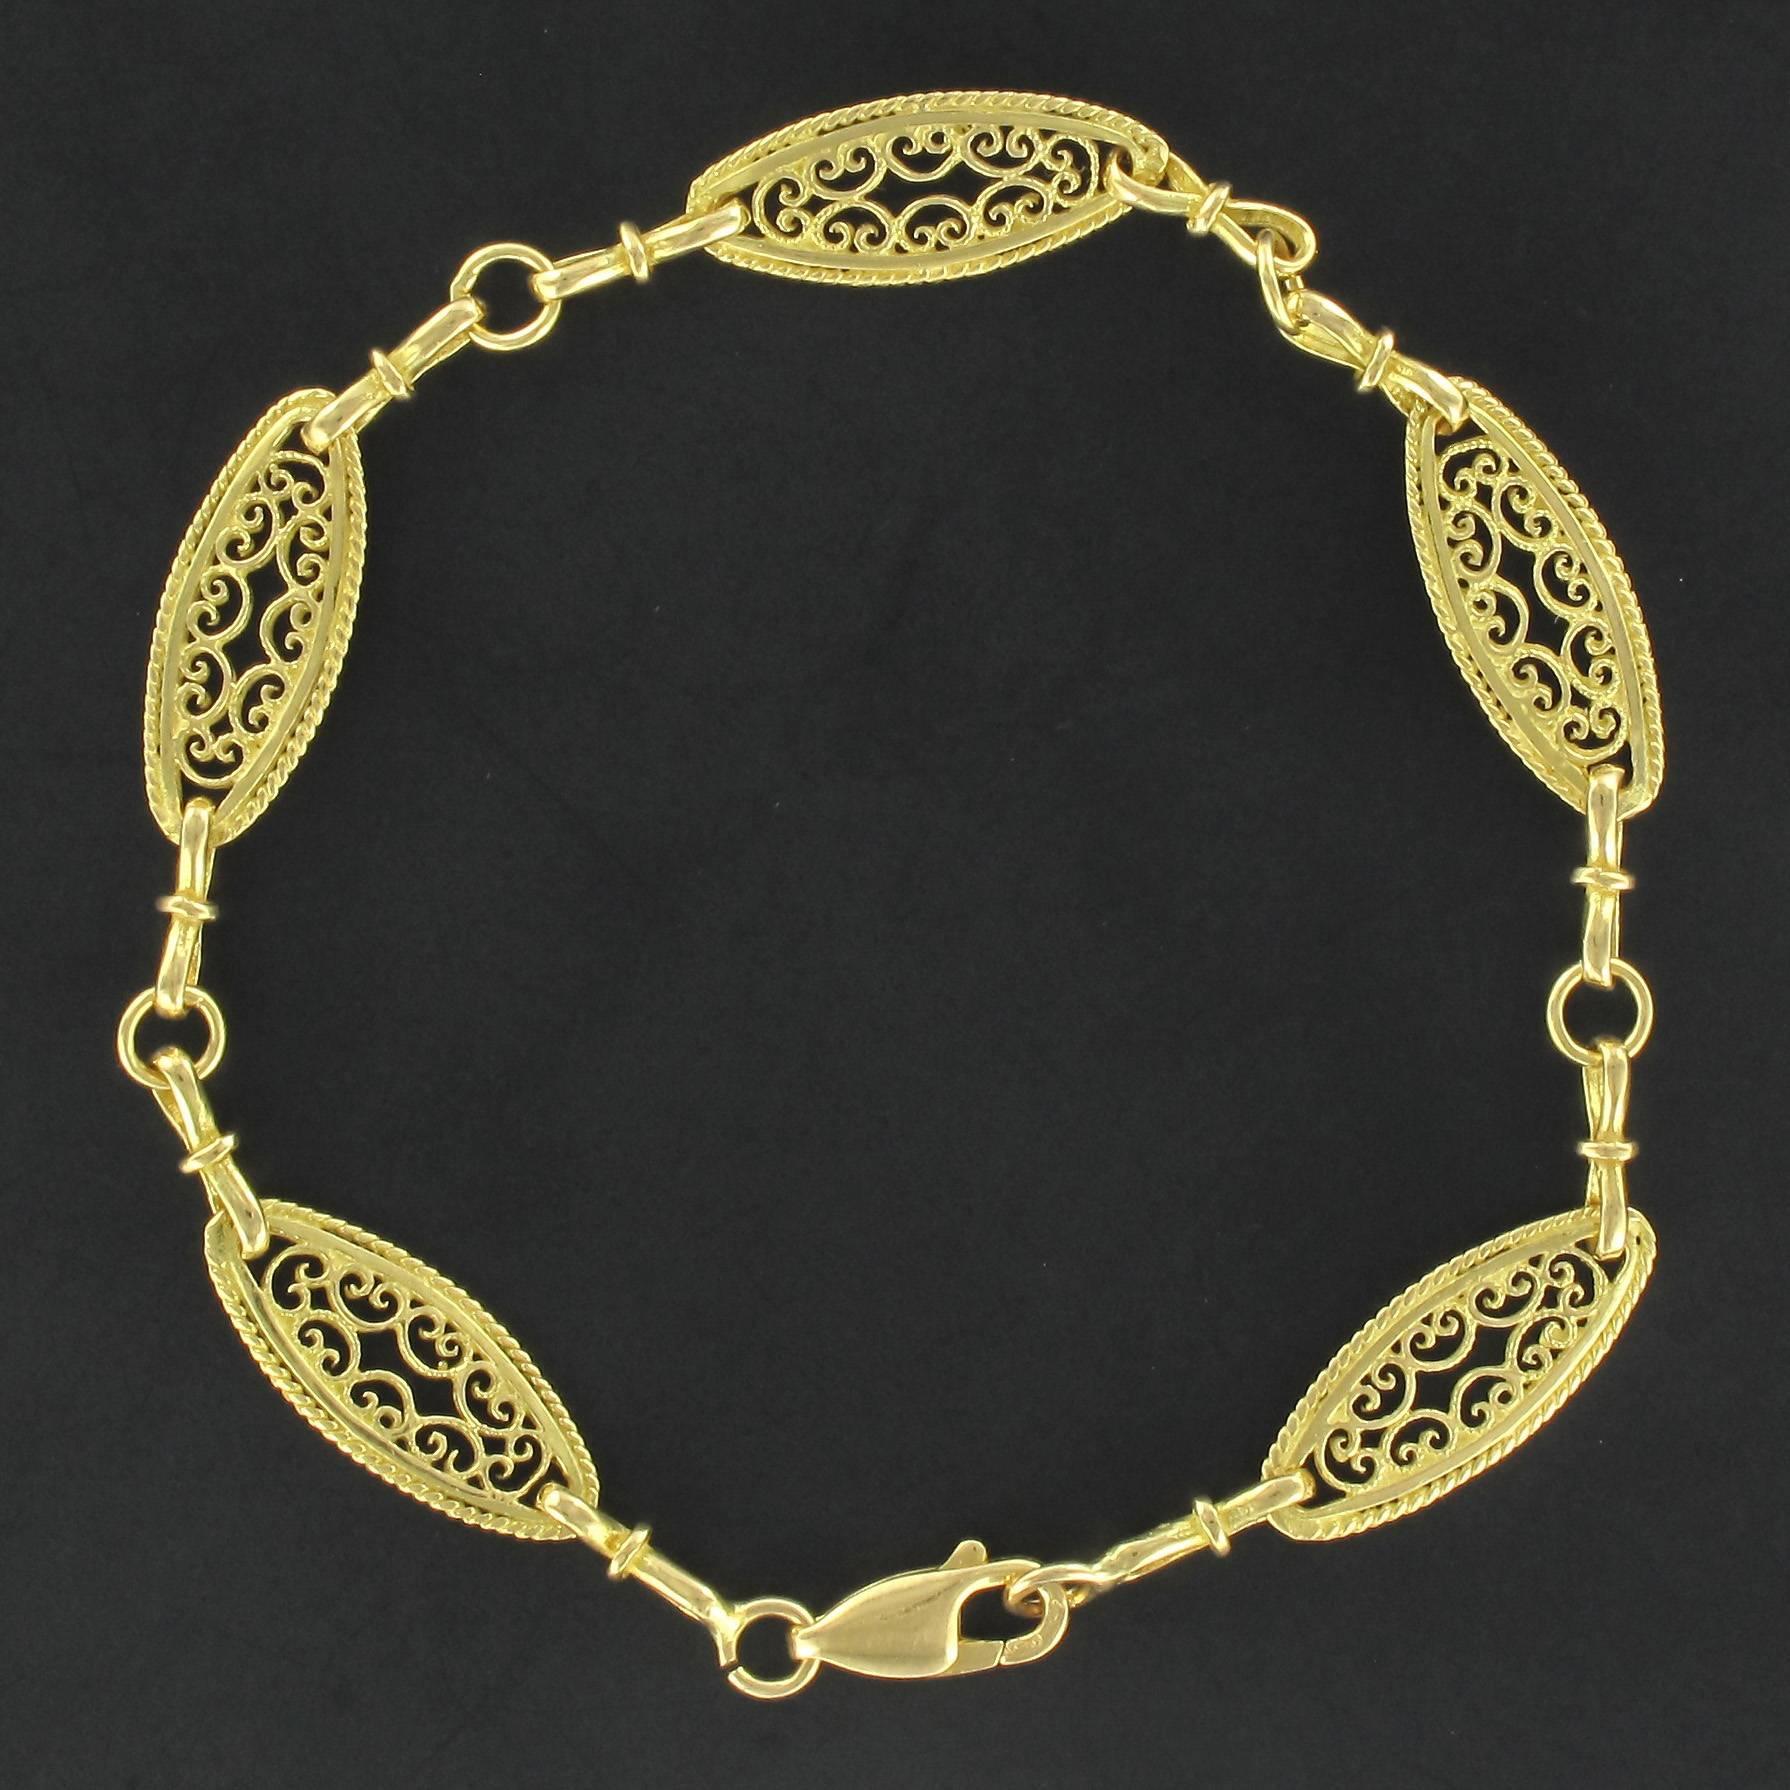 Bracelet in 18 carat yellow gold, eagle head hallmark. 

Composed of openwork links with filigree motives. The clasp is a spring ring. 

Overall length: 20 cm, width at the widest: 8.1 mm, thickness at the thickest: 3 mm.
Total weight: about 7.7